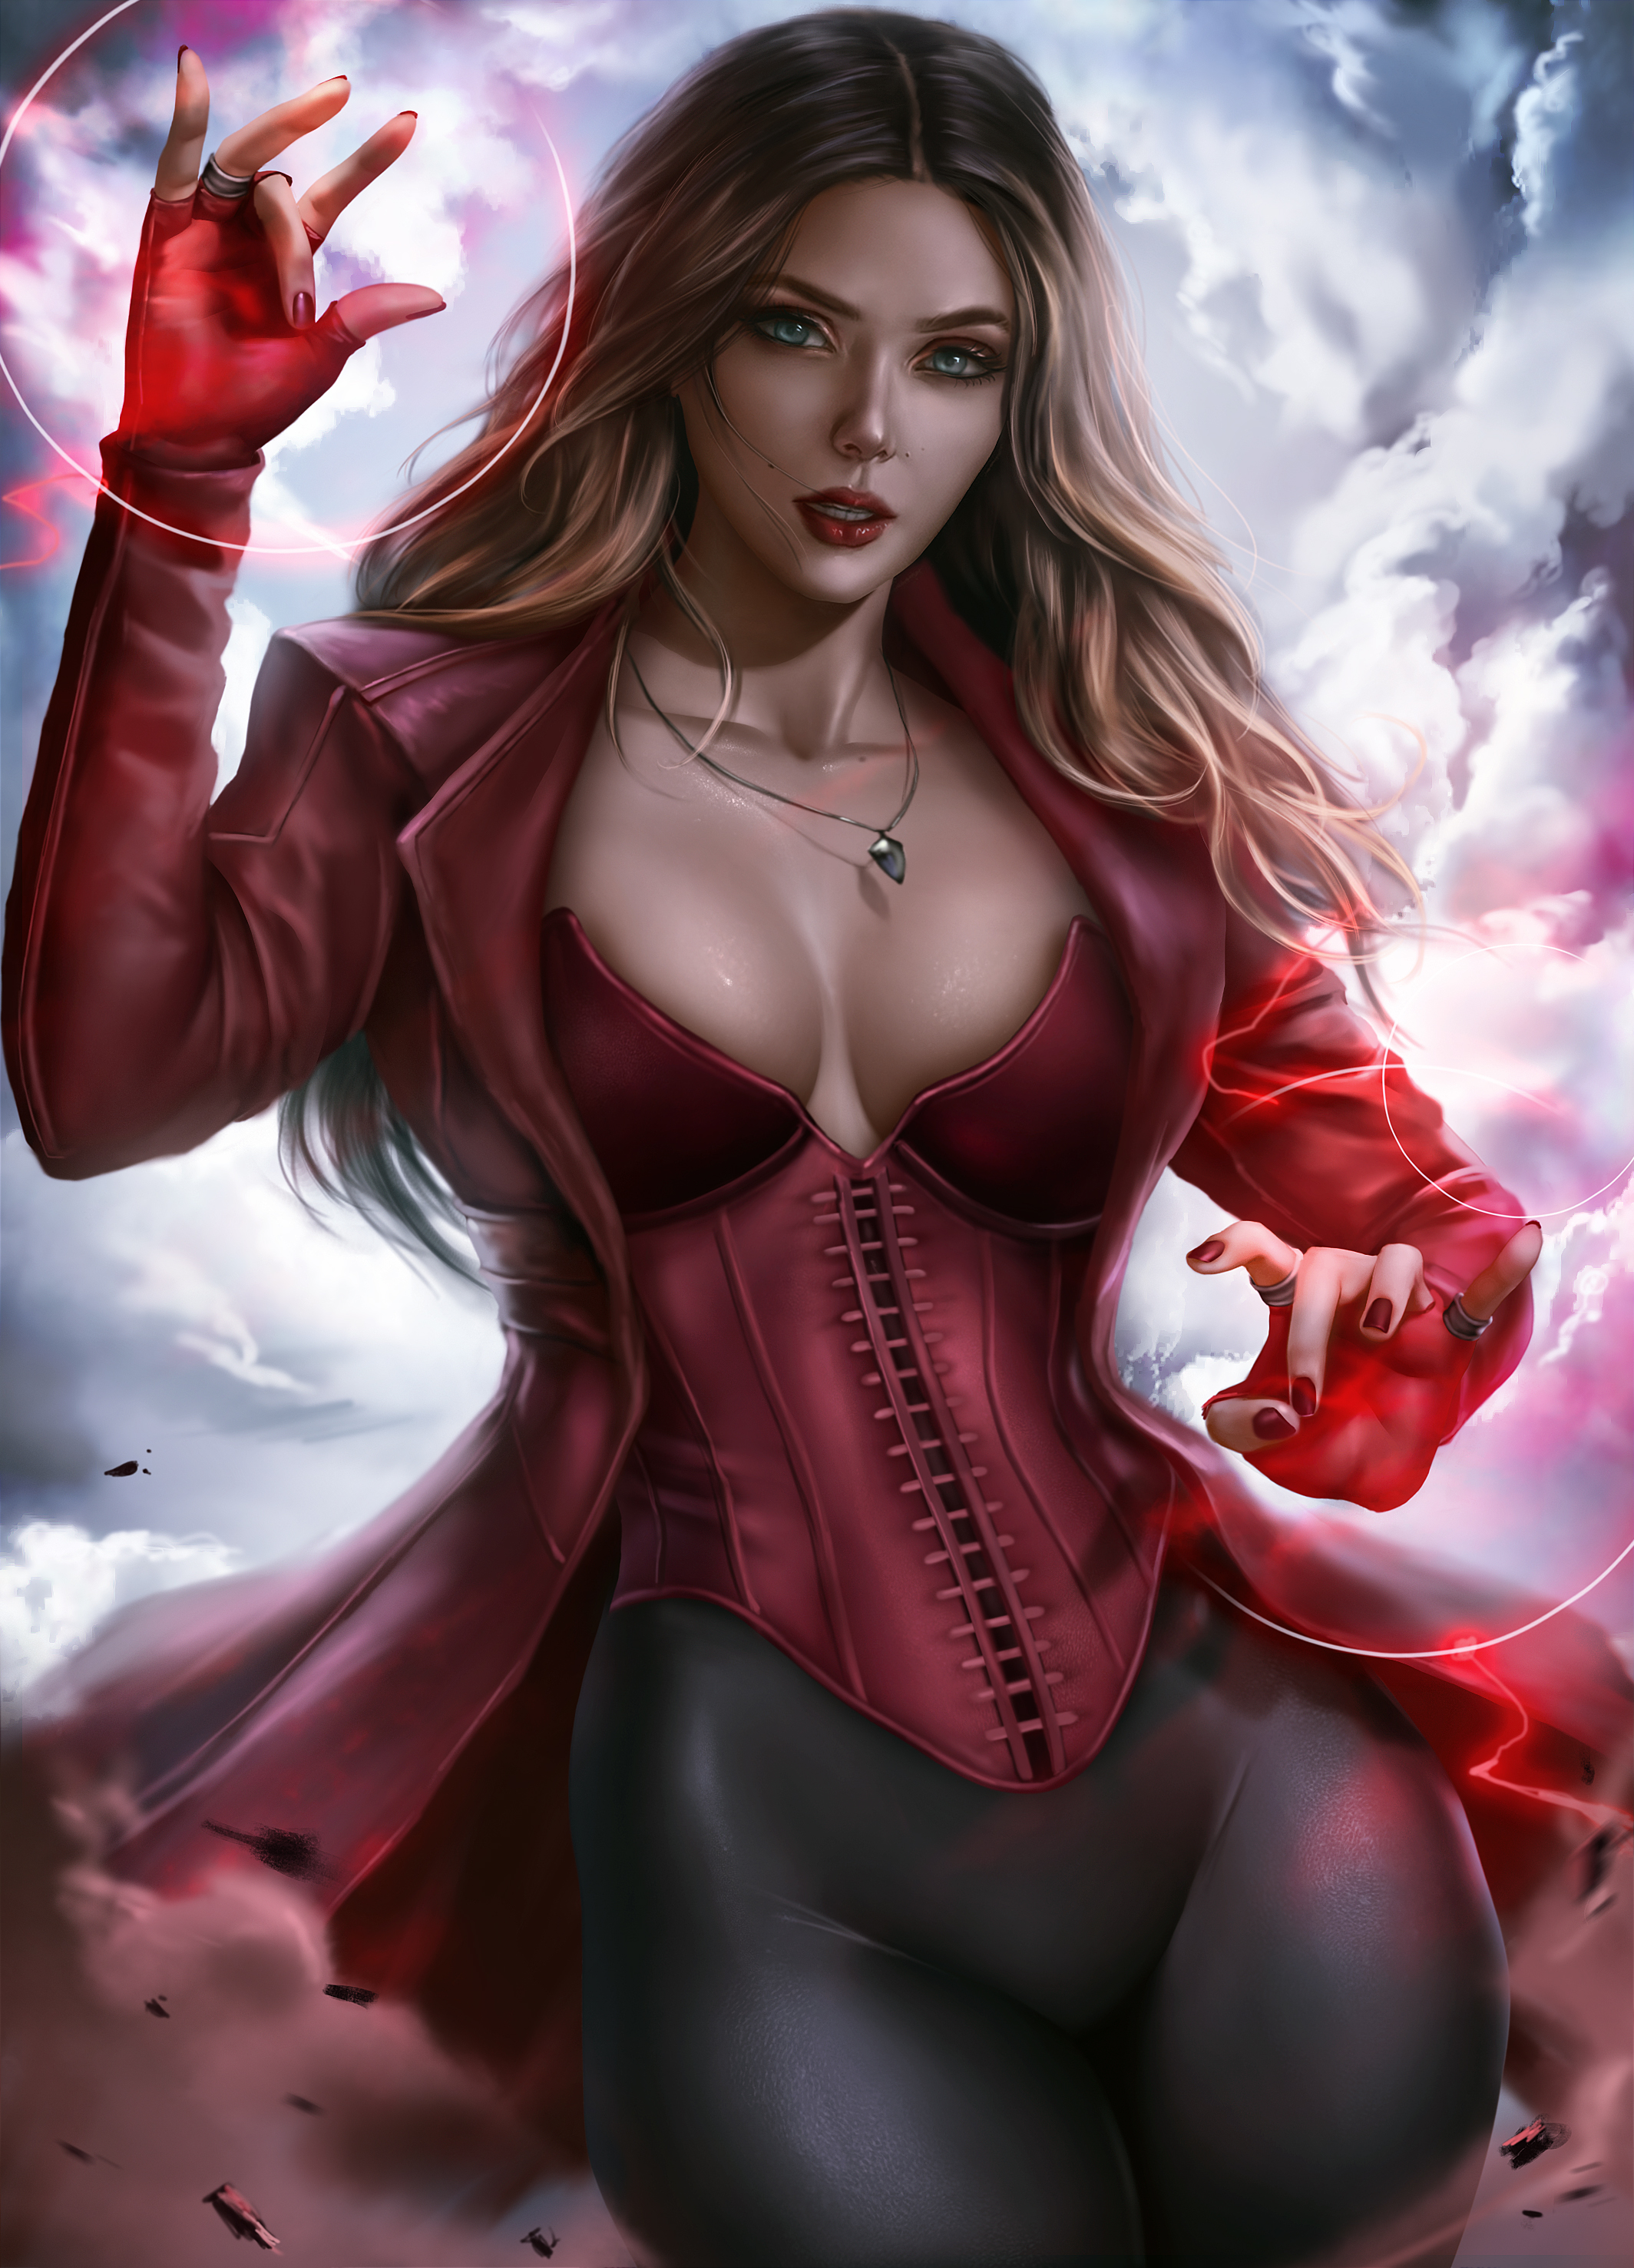 Scarlet Witch Women Brunette Long Hair Looking At Viewer Cleavage Painted Nails Fantasy Girl Fictional Character Logan Cure Elizabeth Olsen Marvel Comics Marvel Cinematic Universe Superheroines Red Lipstick Necklace Coats Corset Dustin tell's a story, breaks his wrist and we praise the uber gods. red lipstick necklace coats corset